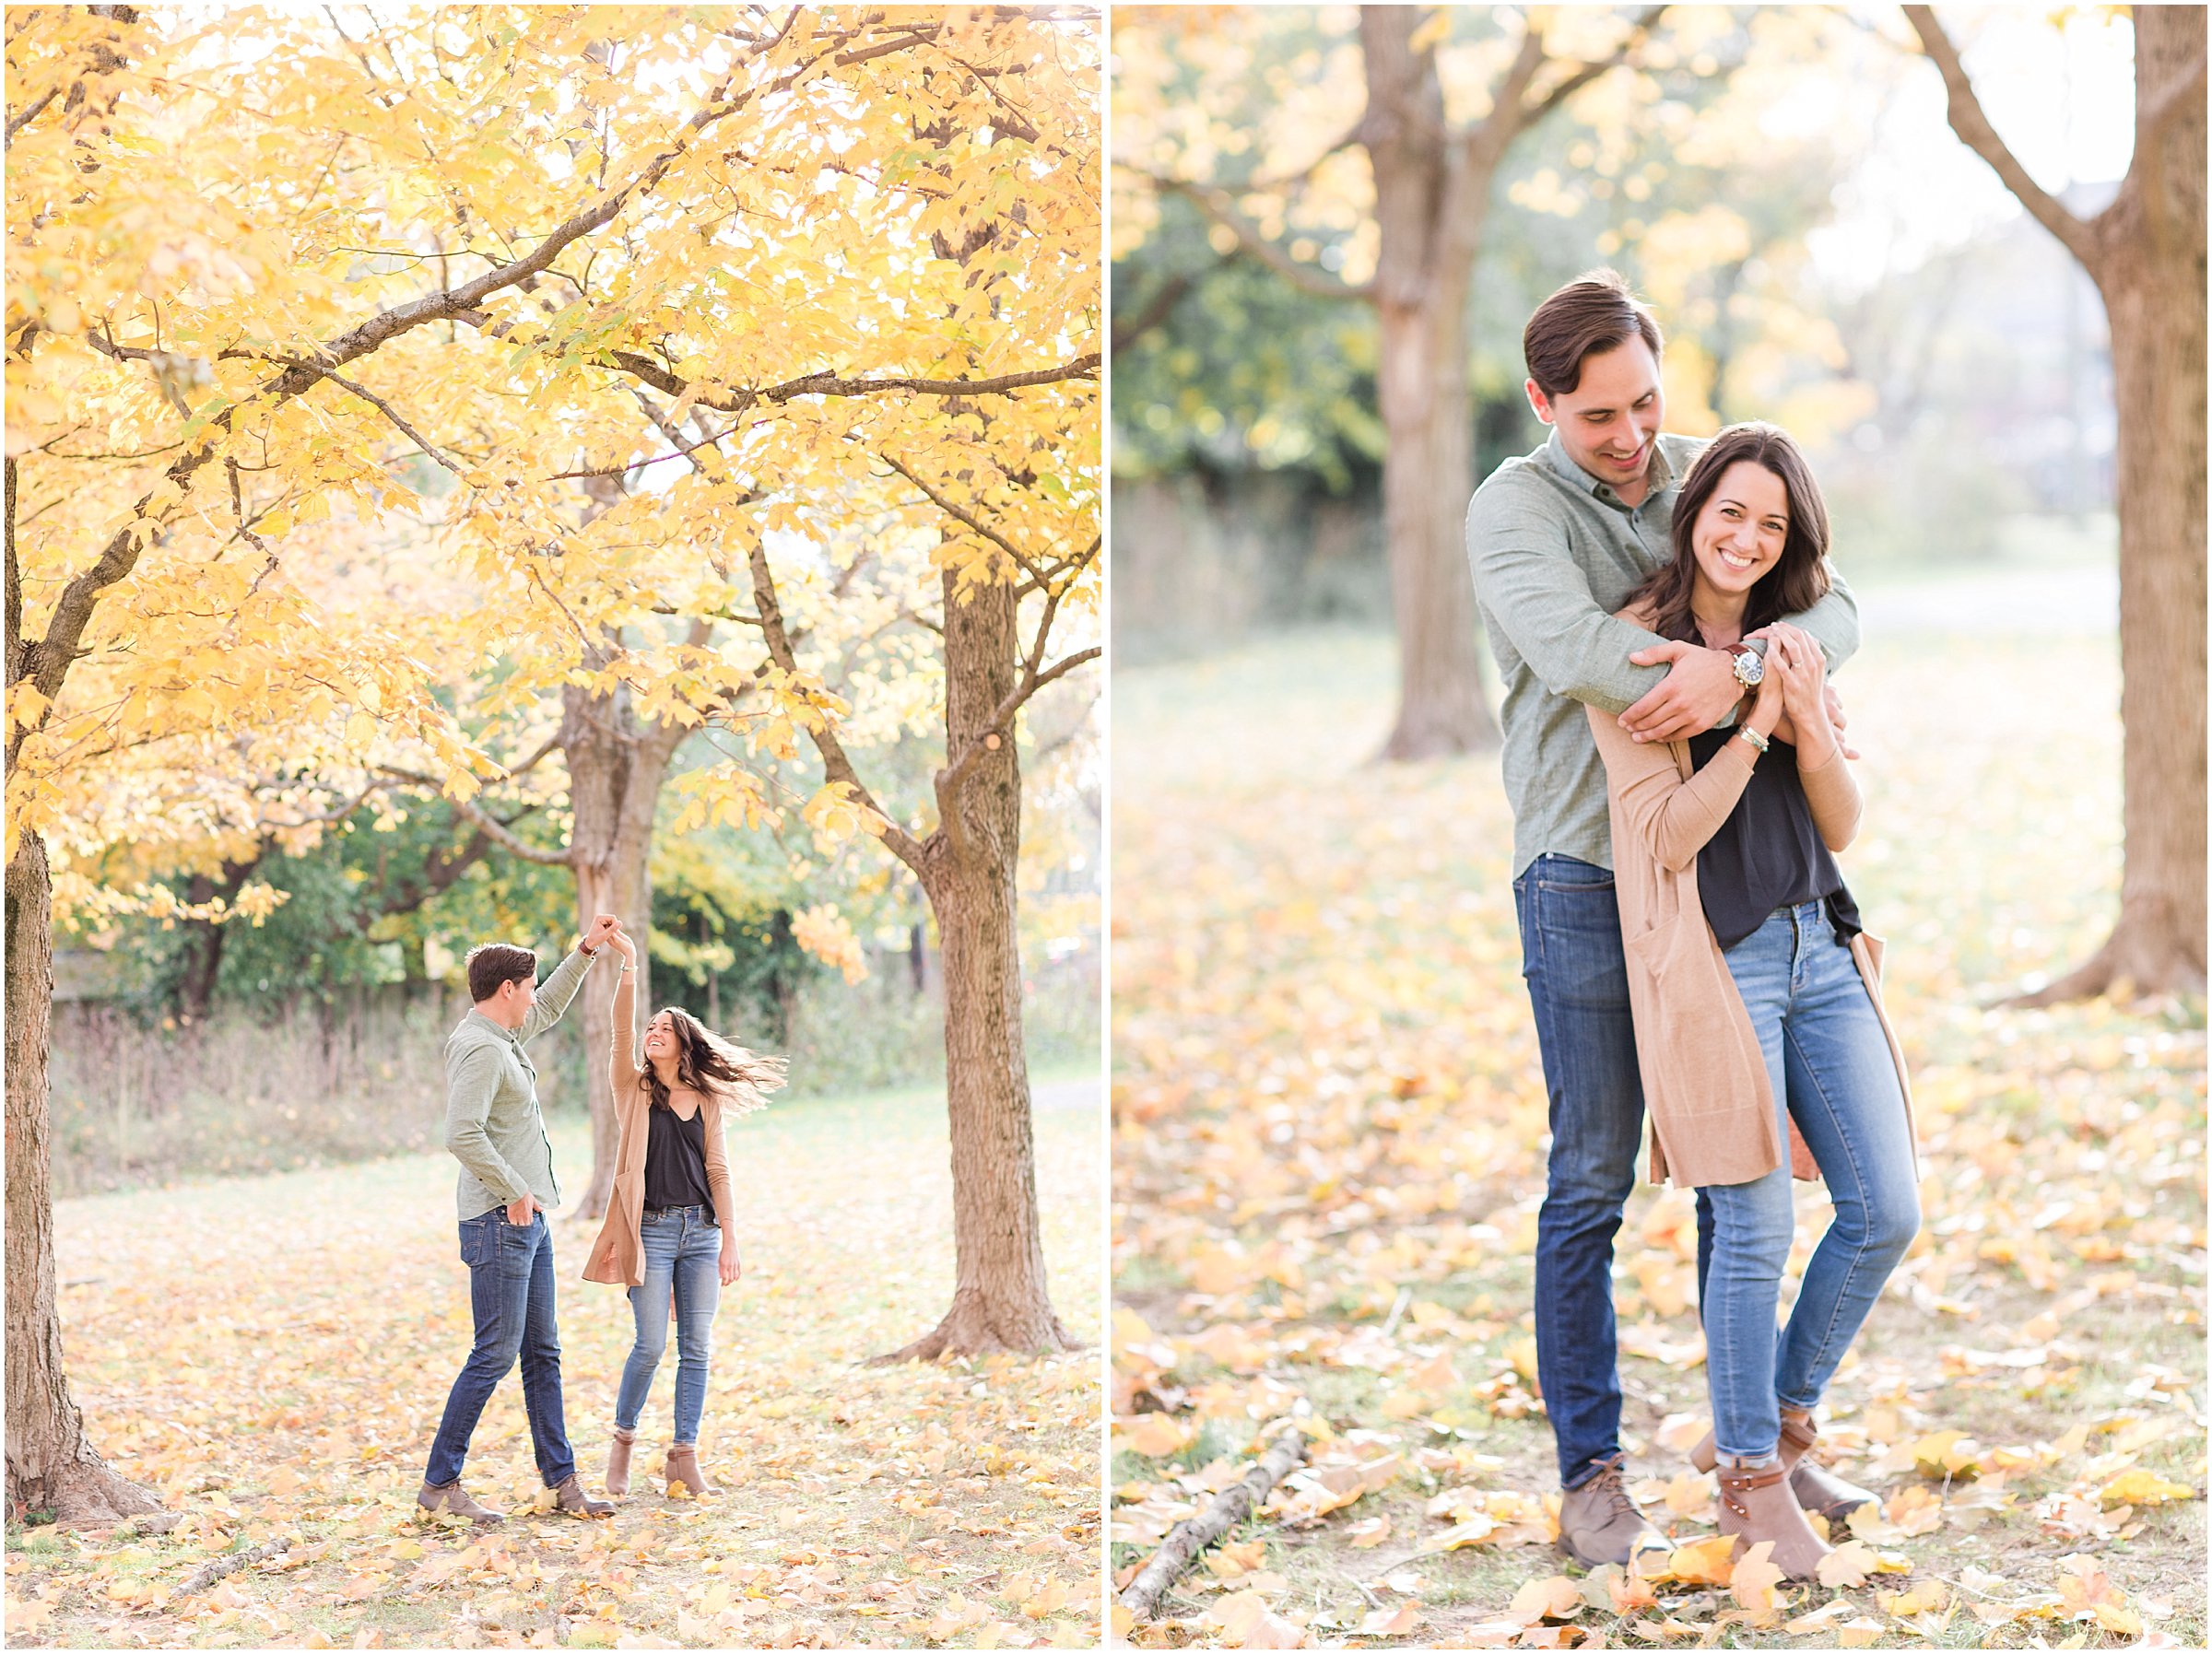 Locally Grown Gardens Engagement Session_0002.jpg